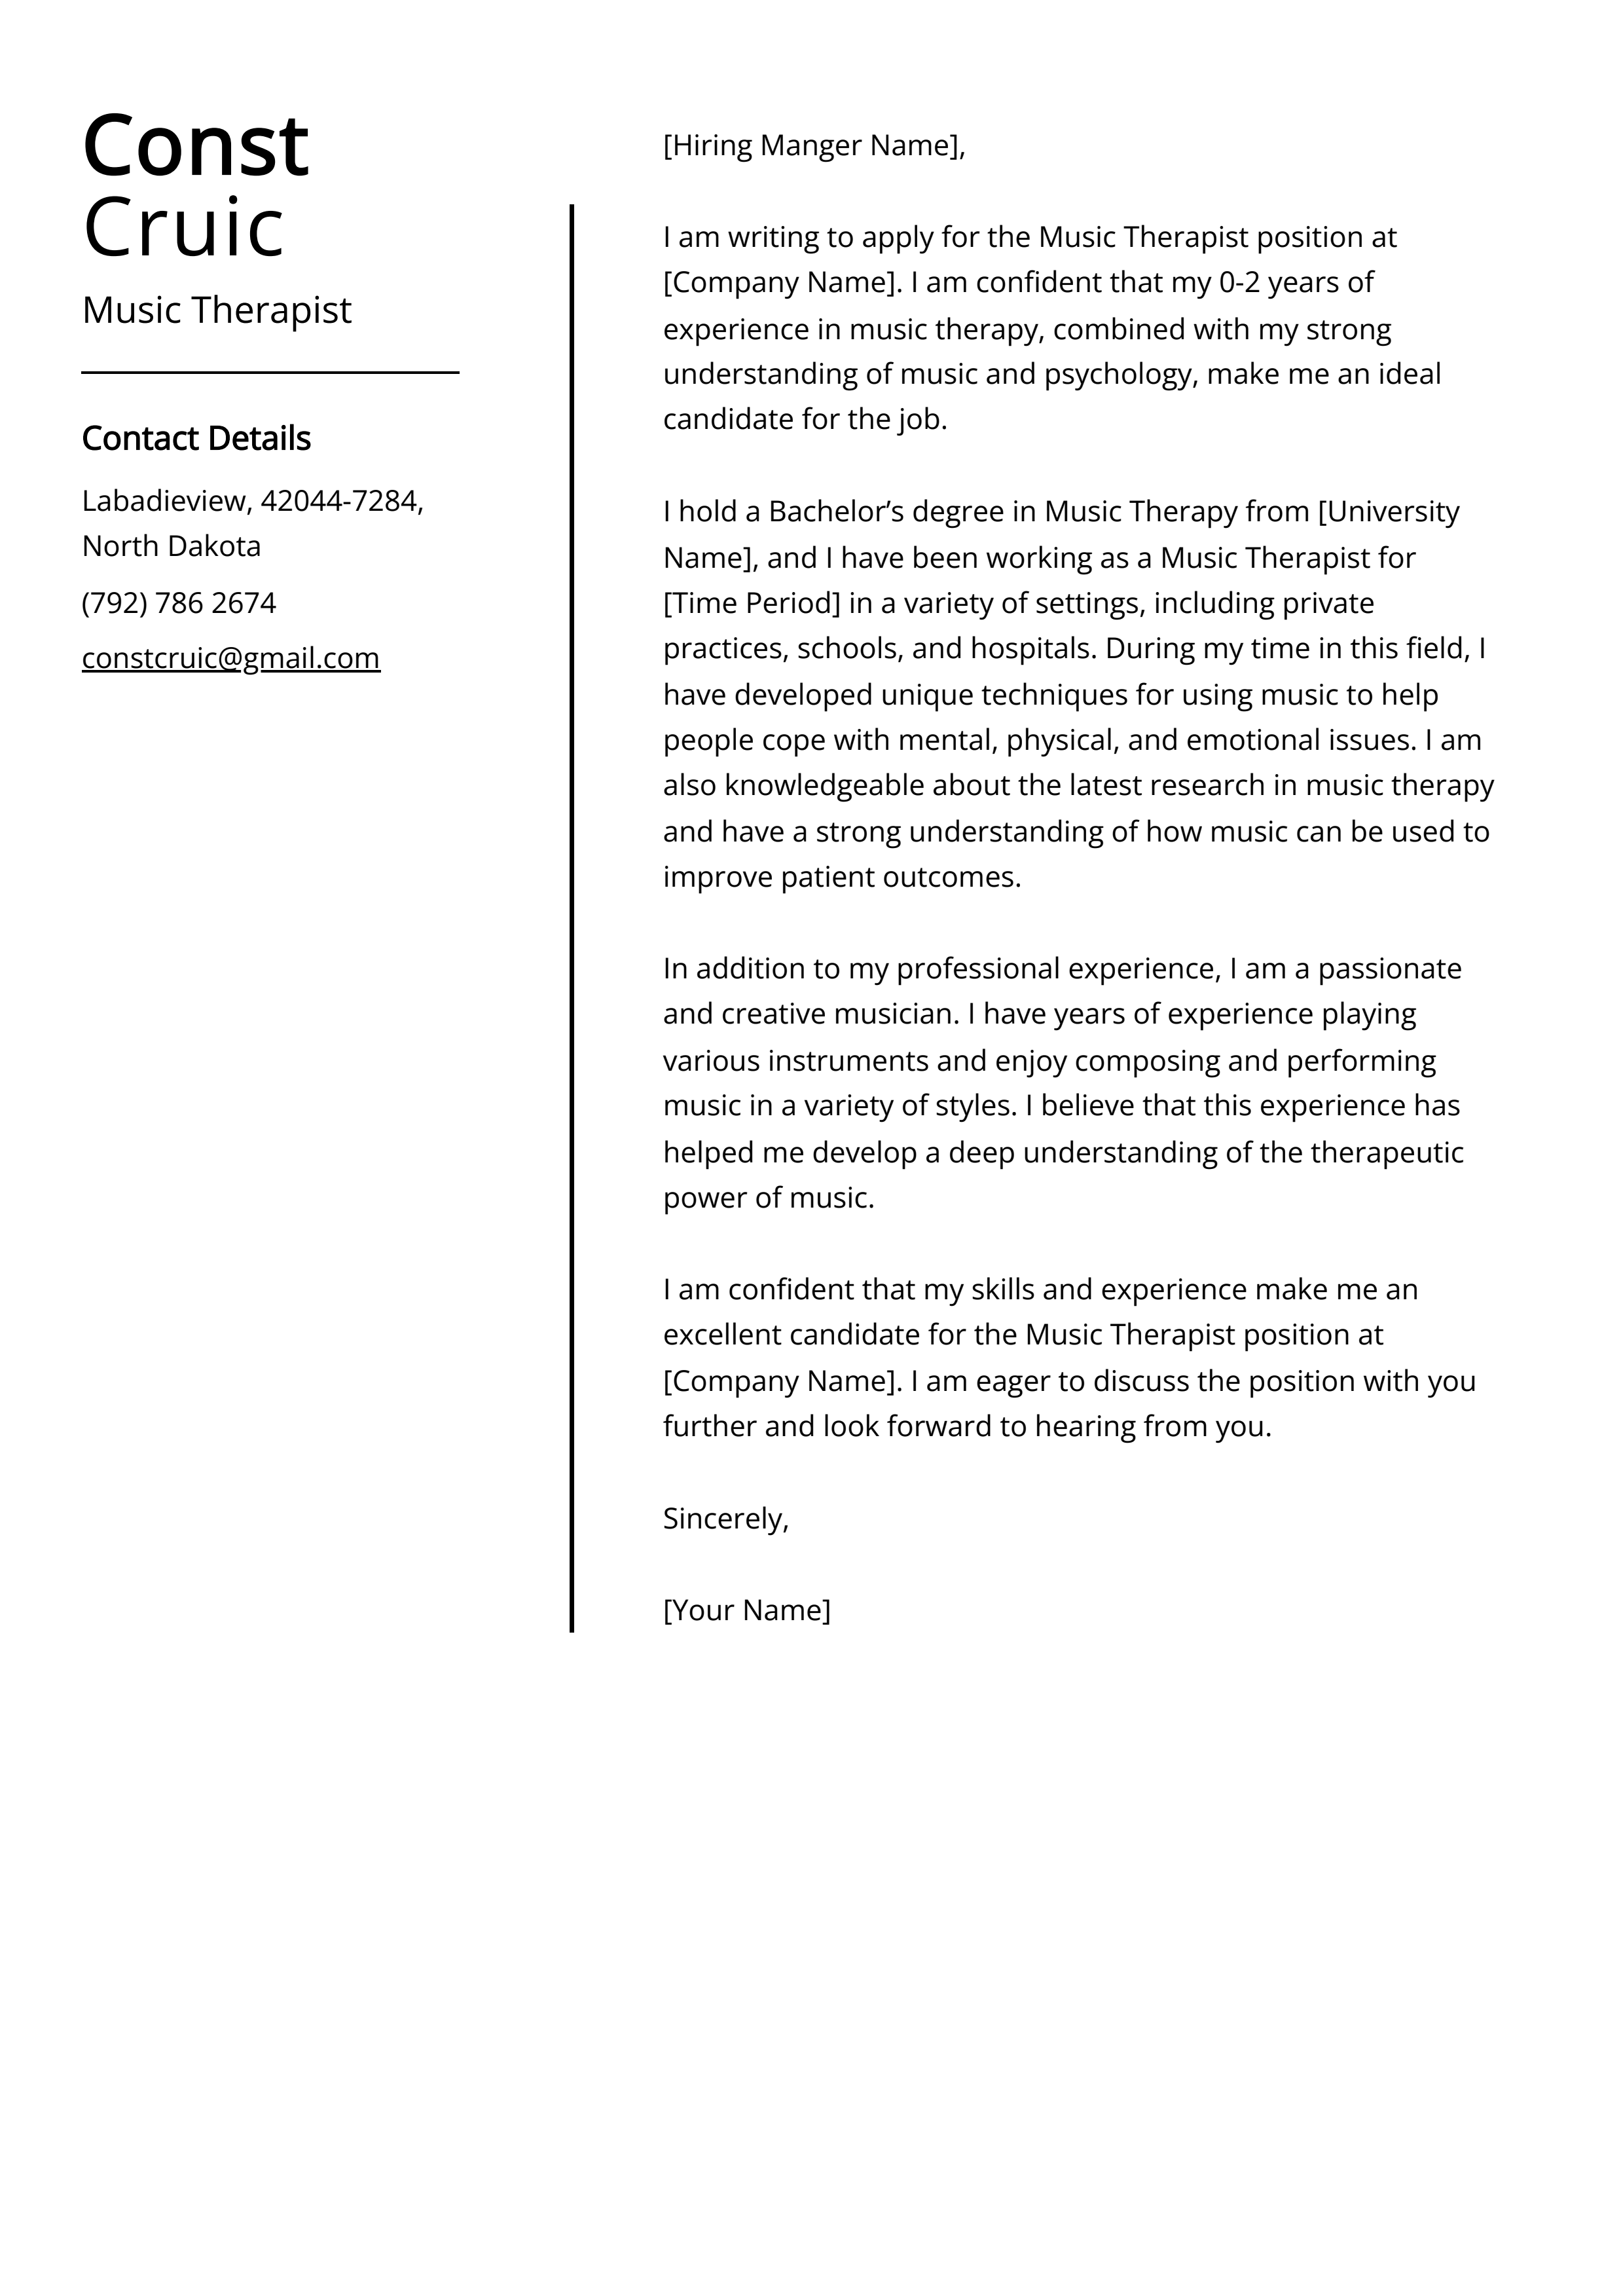 Music Therapist Cover Letter Example